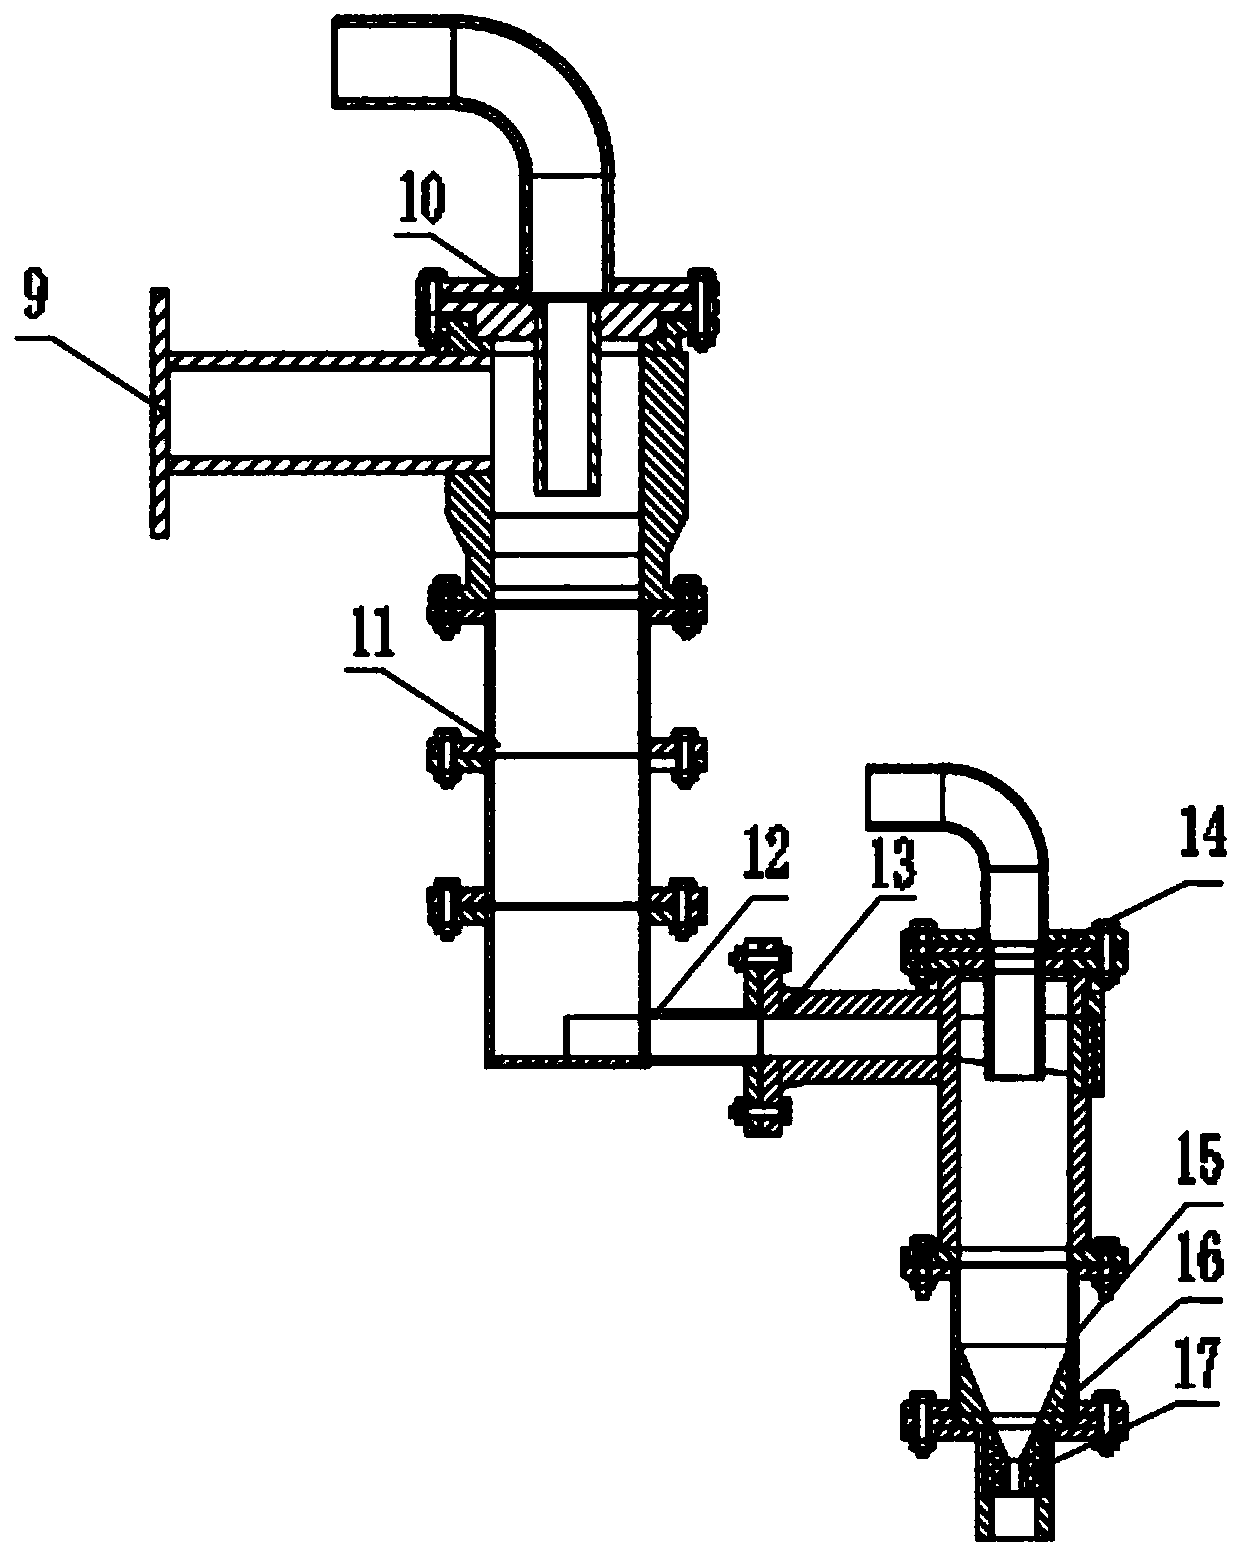 Device and process for recovering jigging overflow coal slime to separate ultra-clean coal through physical cyclone flow